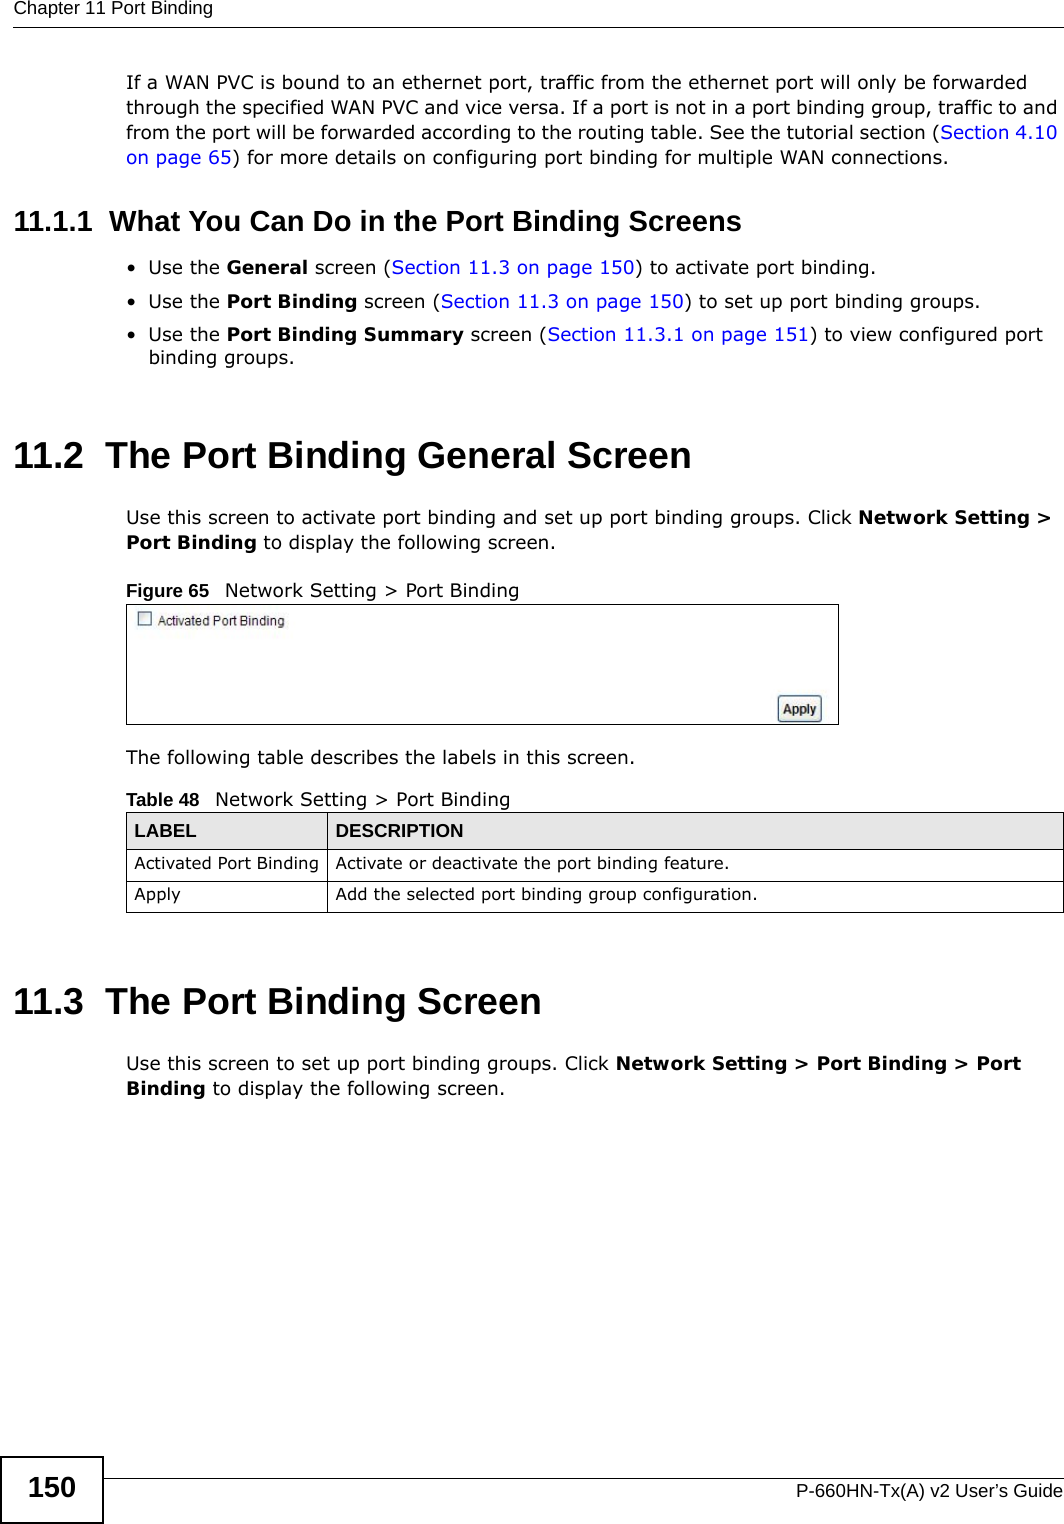 Chapter 11 Port BindingP-660HN-Tx(A) v2 User’s Guide150If a WAN PVC is bound to an ethernet port, traffic from the ethernet port will only be forwarded through the specified WAN PVC and vice versa. If a port is not in a port binding group, traffic to and from the port will be forwarded according to the routing table. See the tutorial section (Section 4.10 on page 65) for more details on configuring port binding for multiple WAN connections.11.1.1  What You Can Do in the Port Binding Screens•Use the General screen (Section 11.3 on page 150) to activate port binding.•Use the Port Binding screen (Section 11.3 on page 150) to set up port binding groups.•Use the Port Binding Summary screen (Section 11.3.1 on page 151) to view configured port binding groups.11.2  The Port Binding General ScreenUse this screen to activate port binding and set up port binding groups. Click Network Setting &gt; Port Binding to display the following screen.Figure 65   Network Setting &gt; Port BindingThe following table describes the labels in this screen. 11.3  The Port Binding ScreenUse this screen to set up port binding groups. Click Network Setting &gt; Port Binding &gt; Port Binding to display the following screen.Table 48   Network Setting &gt; Port BindingLABEL DESCRIPTIONActivated Port Binding Activate or deactivate the port binding feature.Apply Add the selected port binding group configuration.